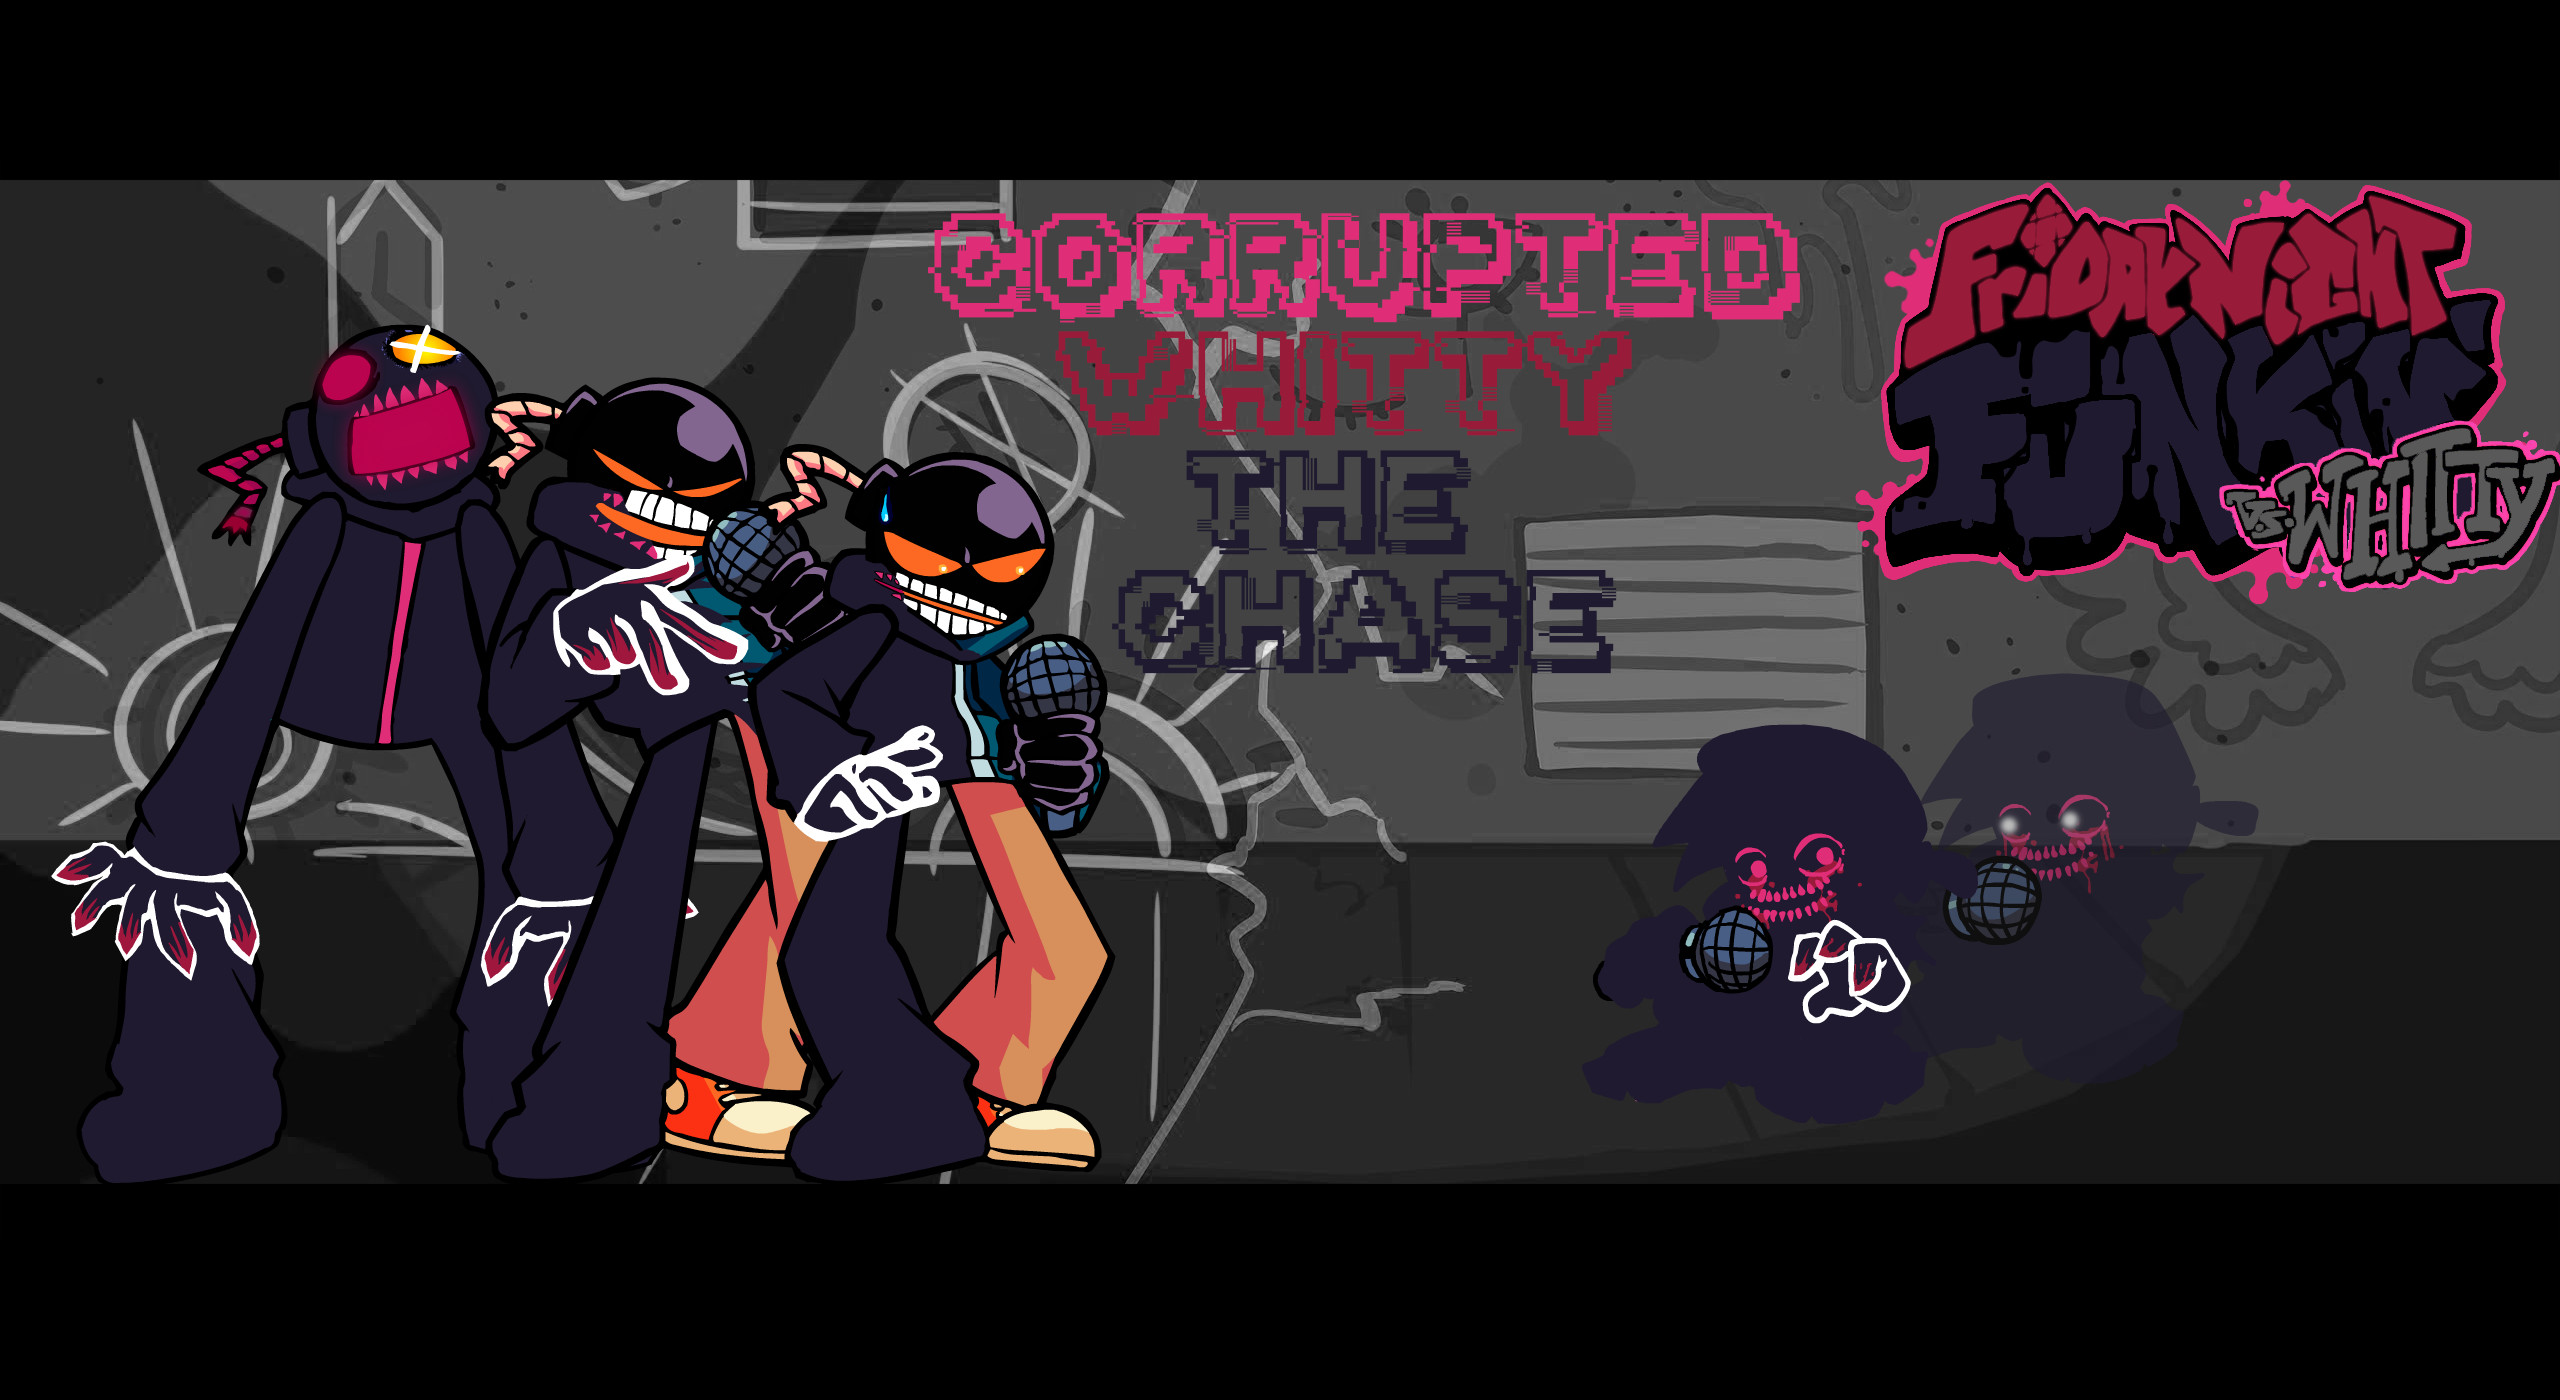 Corruption night. Whitty corruption Mod. FNF Уитти заражение. Corrupted Whitty FNF. ФНФ мод corruption.